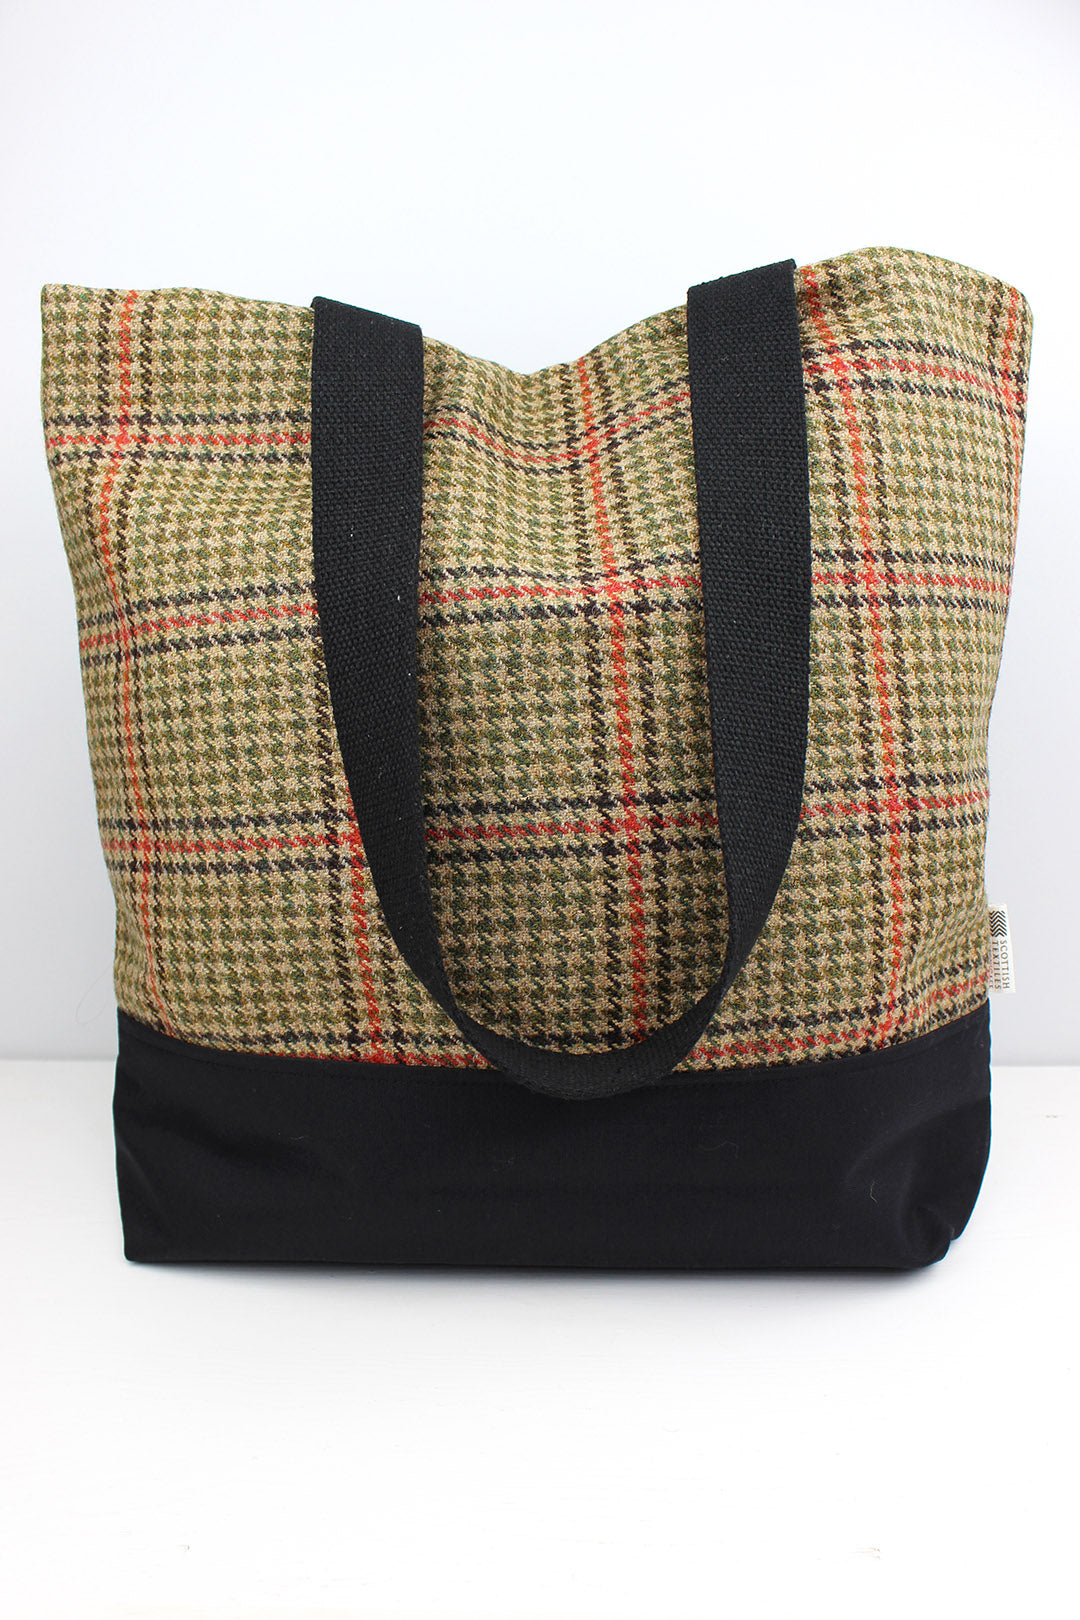 stylish and sustainably made green and orange check tweed shopper bag is perfect for laptops, books, shopping